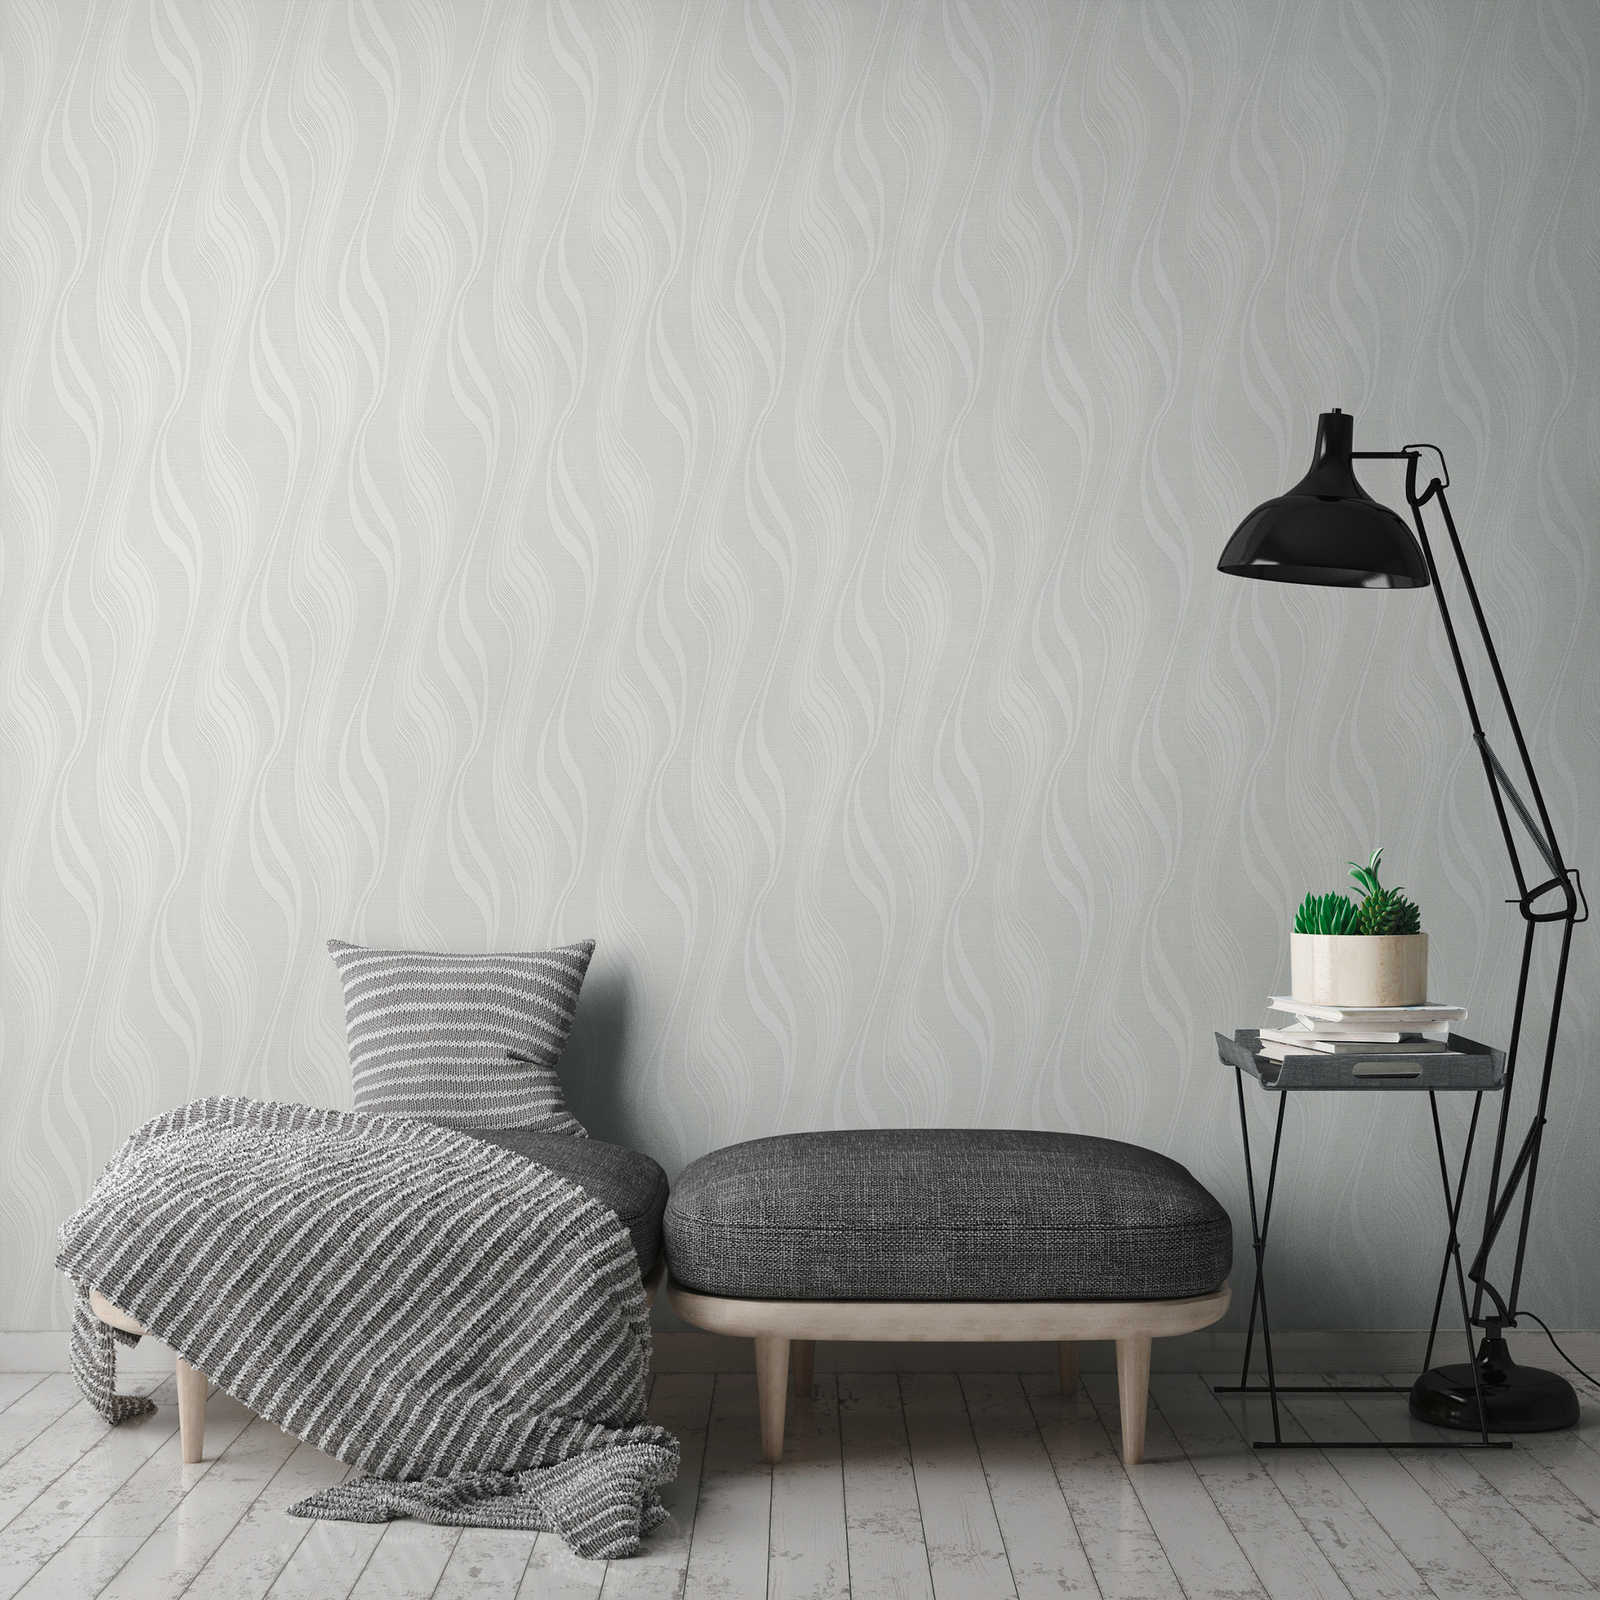             Wallpaper with organic line pattern and 3D effect - white
        